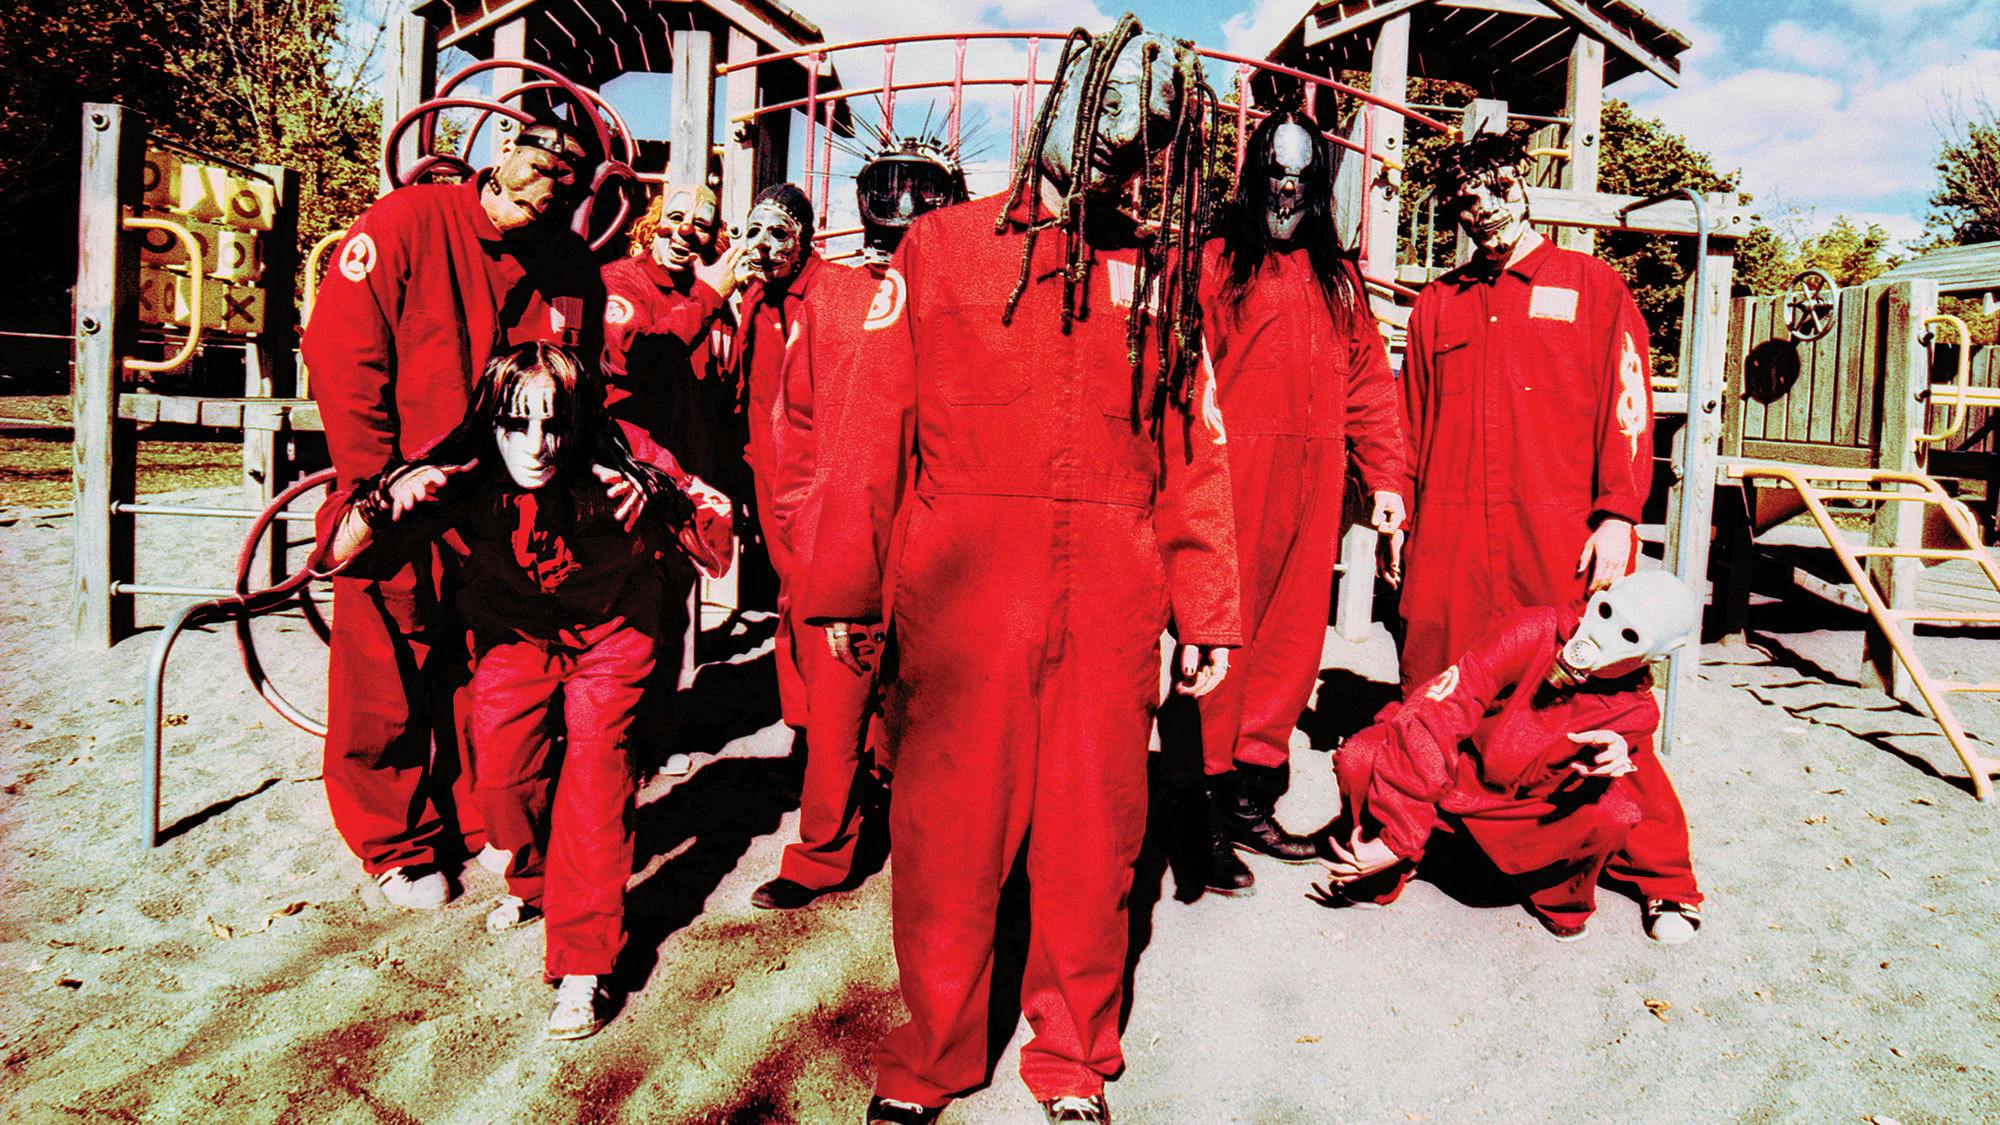 Corey Taylor On Slipknot's First-Ever Tour: "I Can Remember Scavenging For Food"